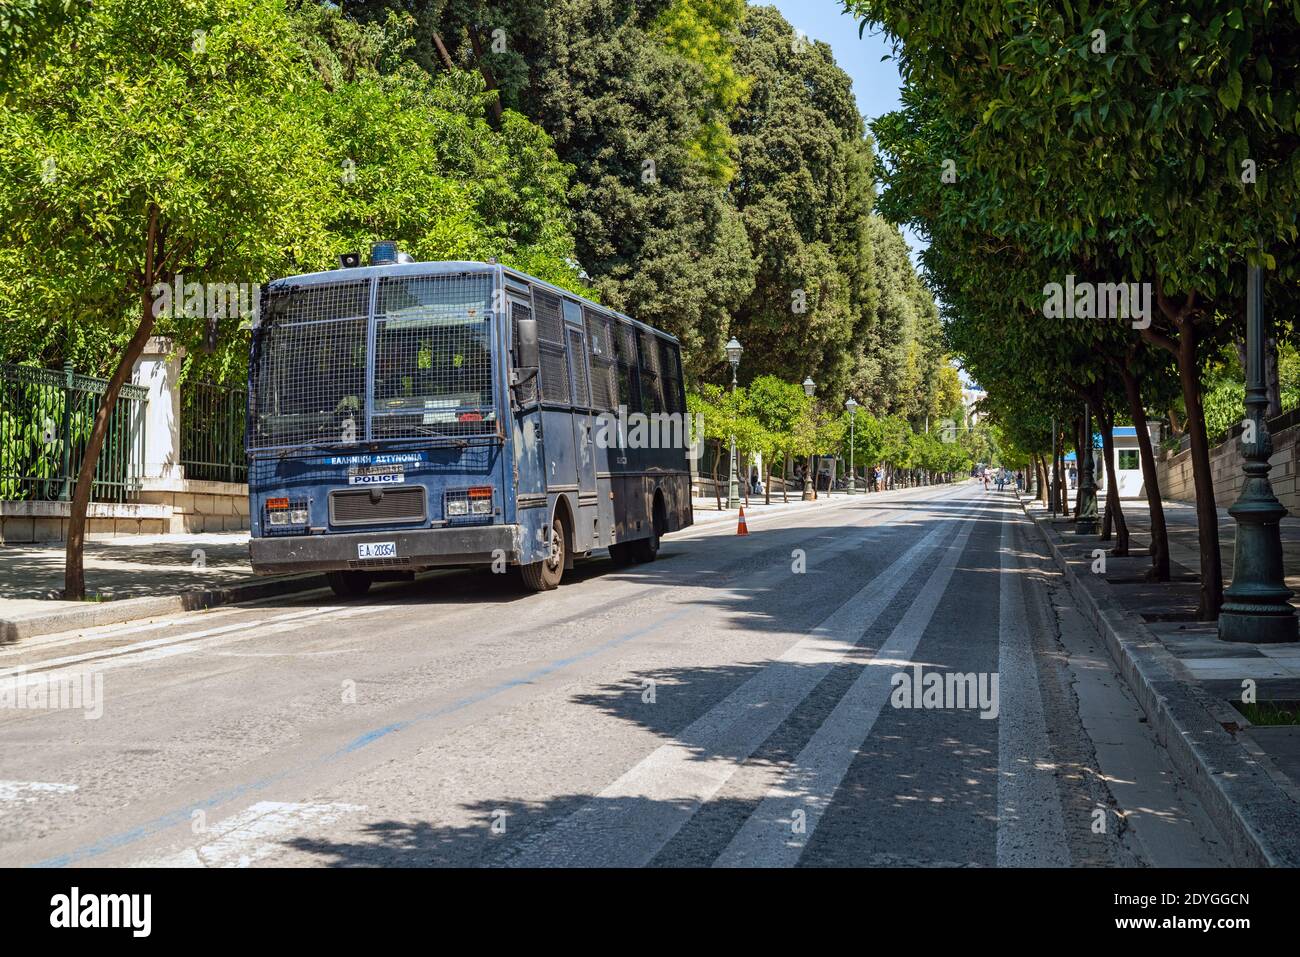 Greek ρiot police bus in Athens, Greece Stock Photo